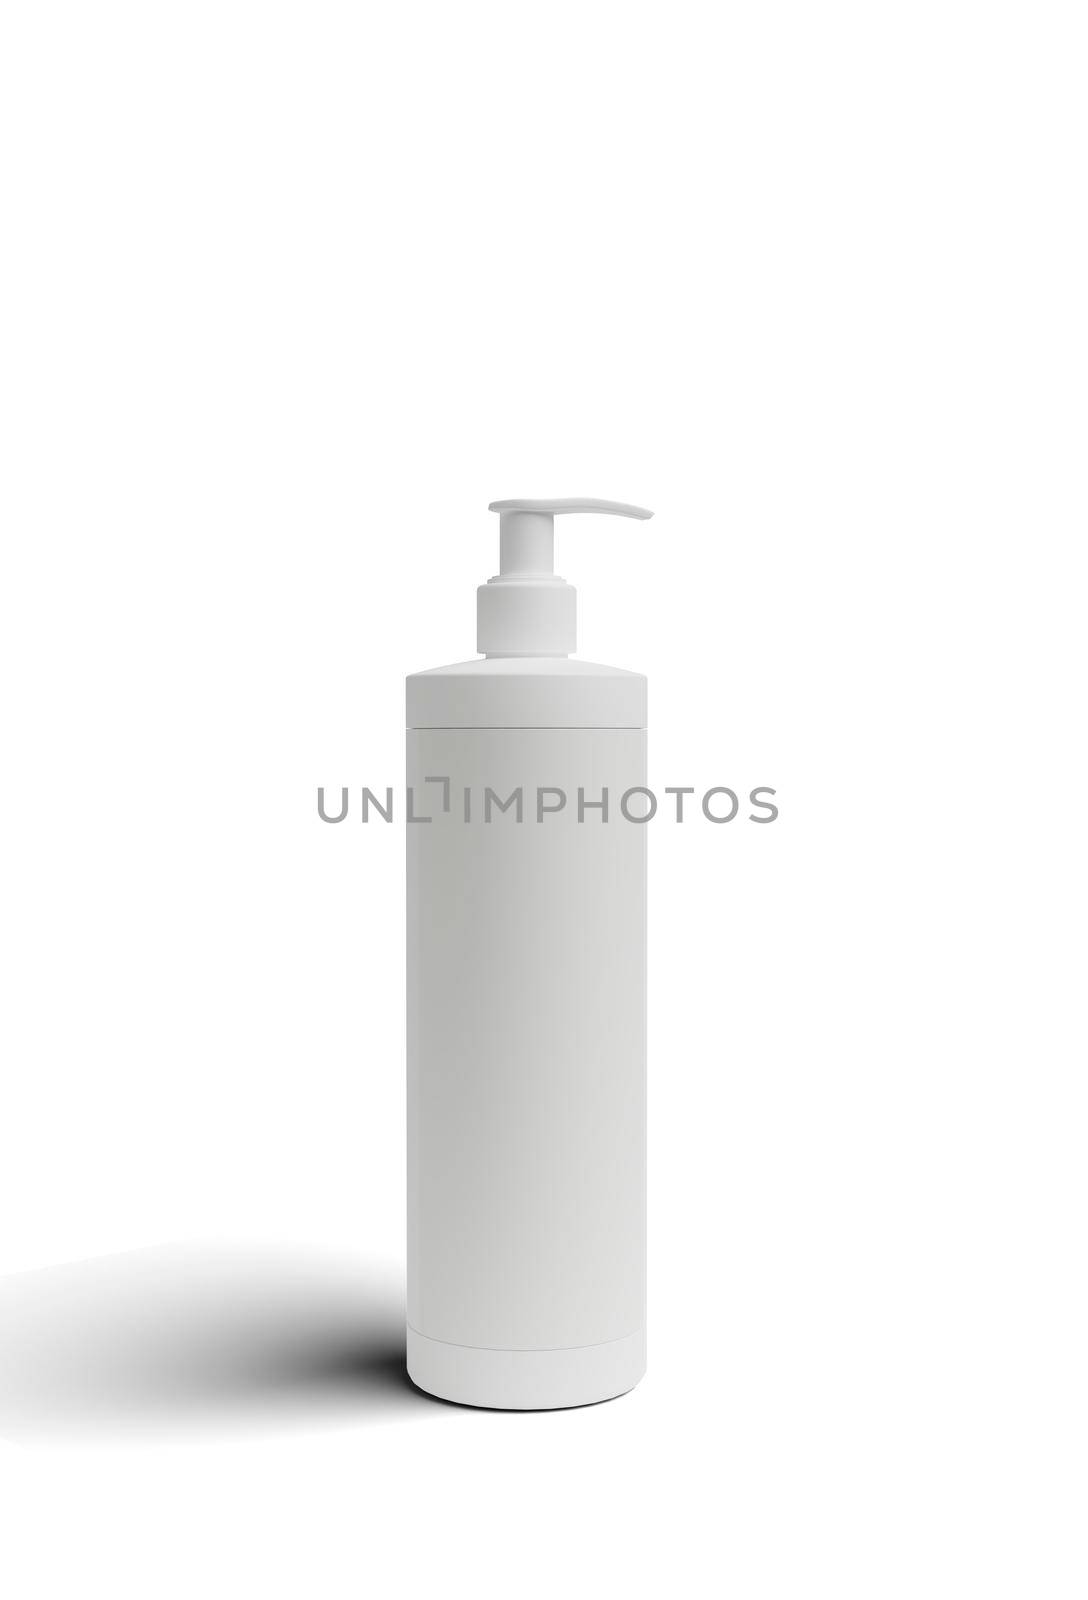 cosmetic bottle mockup with silver cap. realistic illustration. 3d rendering. by jbruiz78